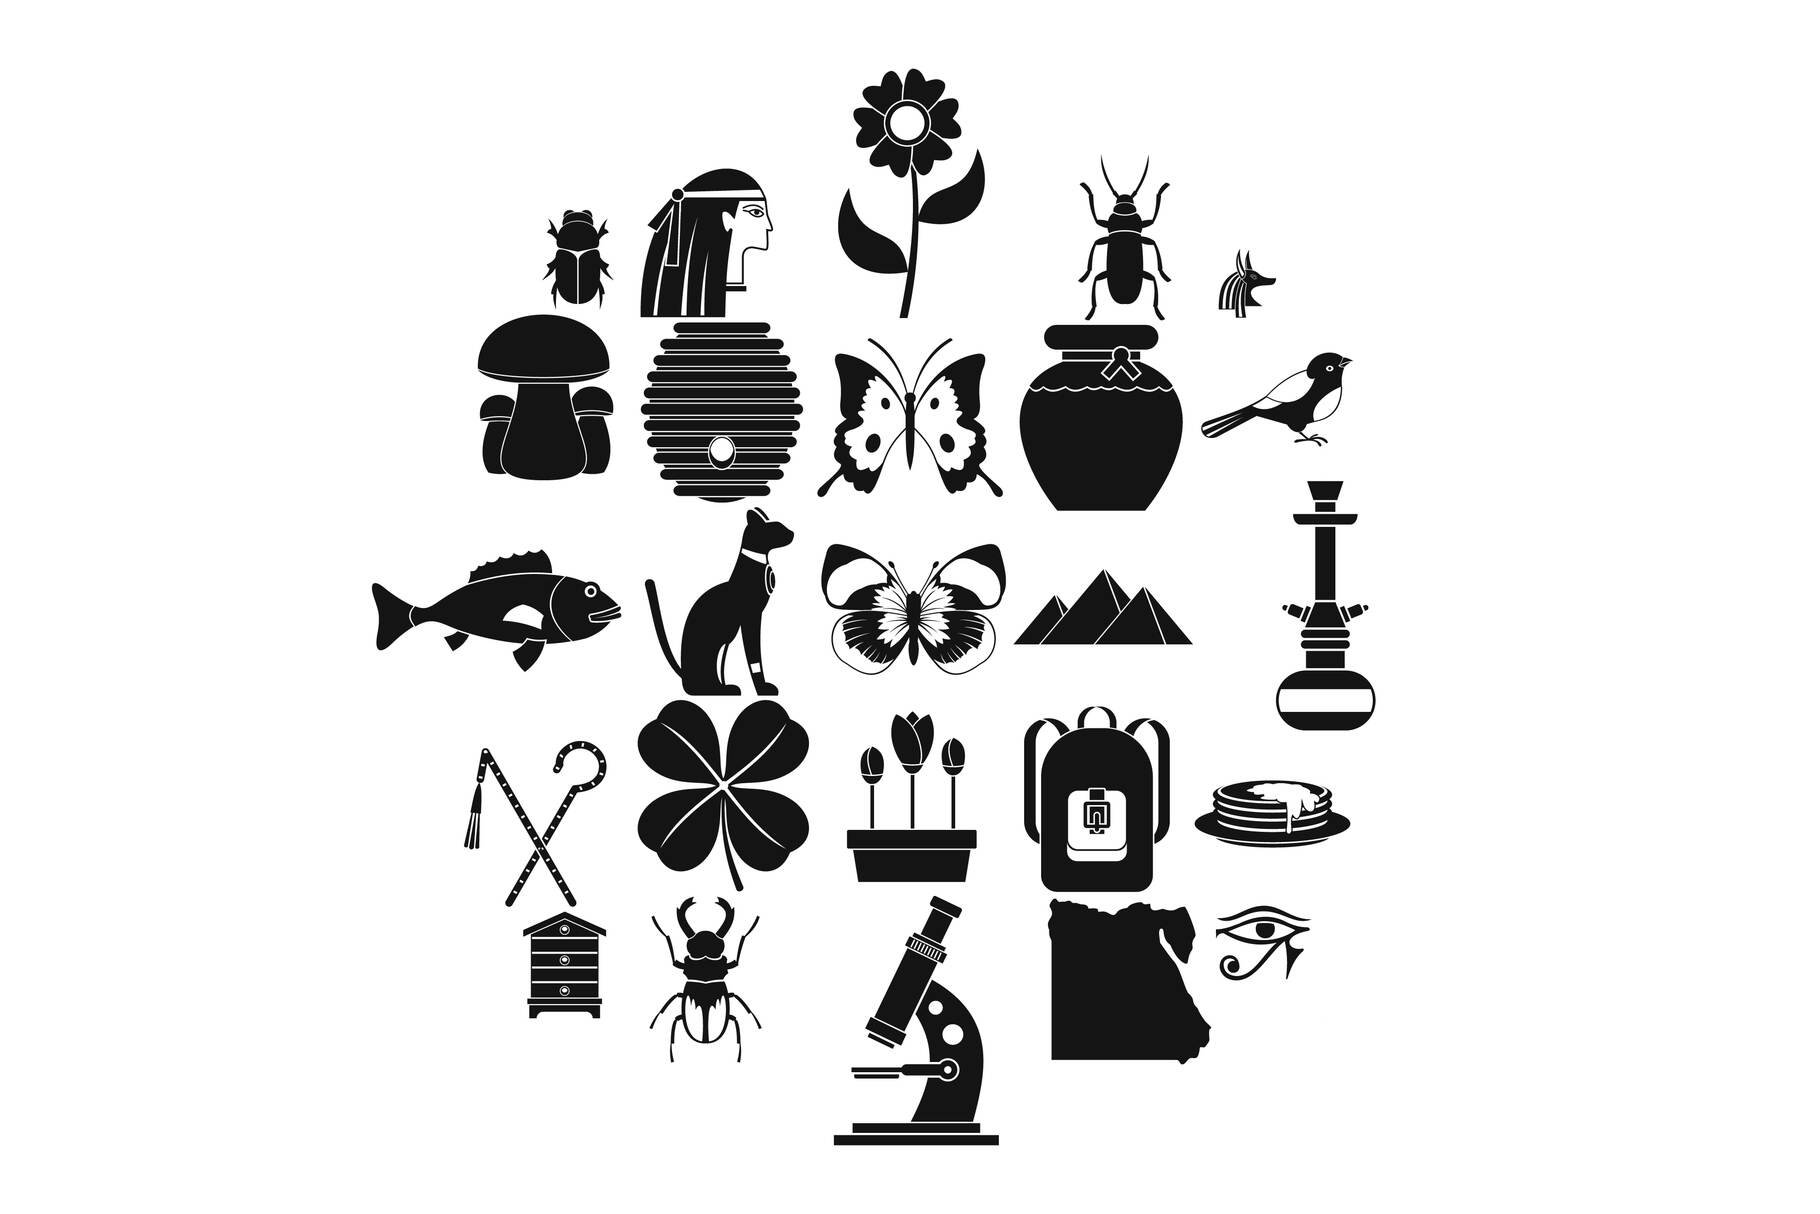 Bug icons set, simple style cover image.